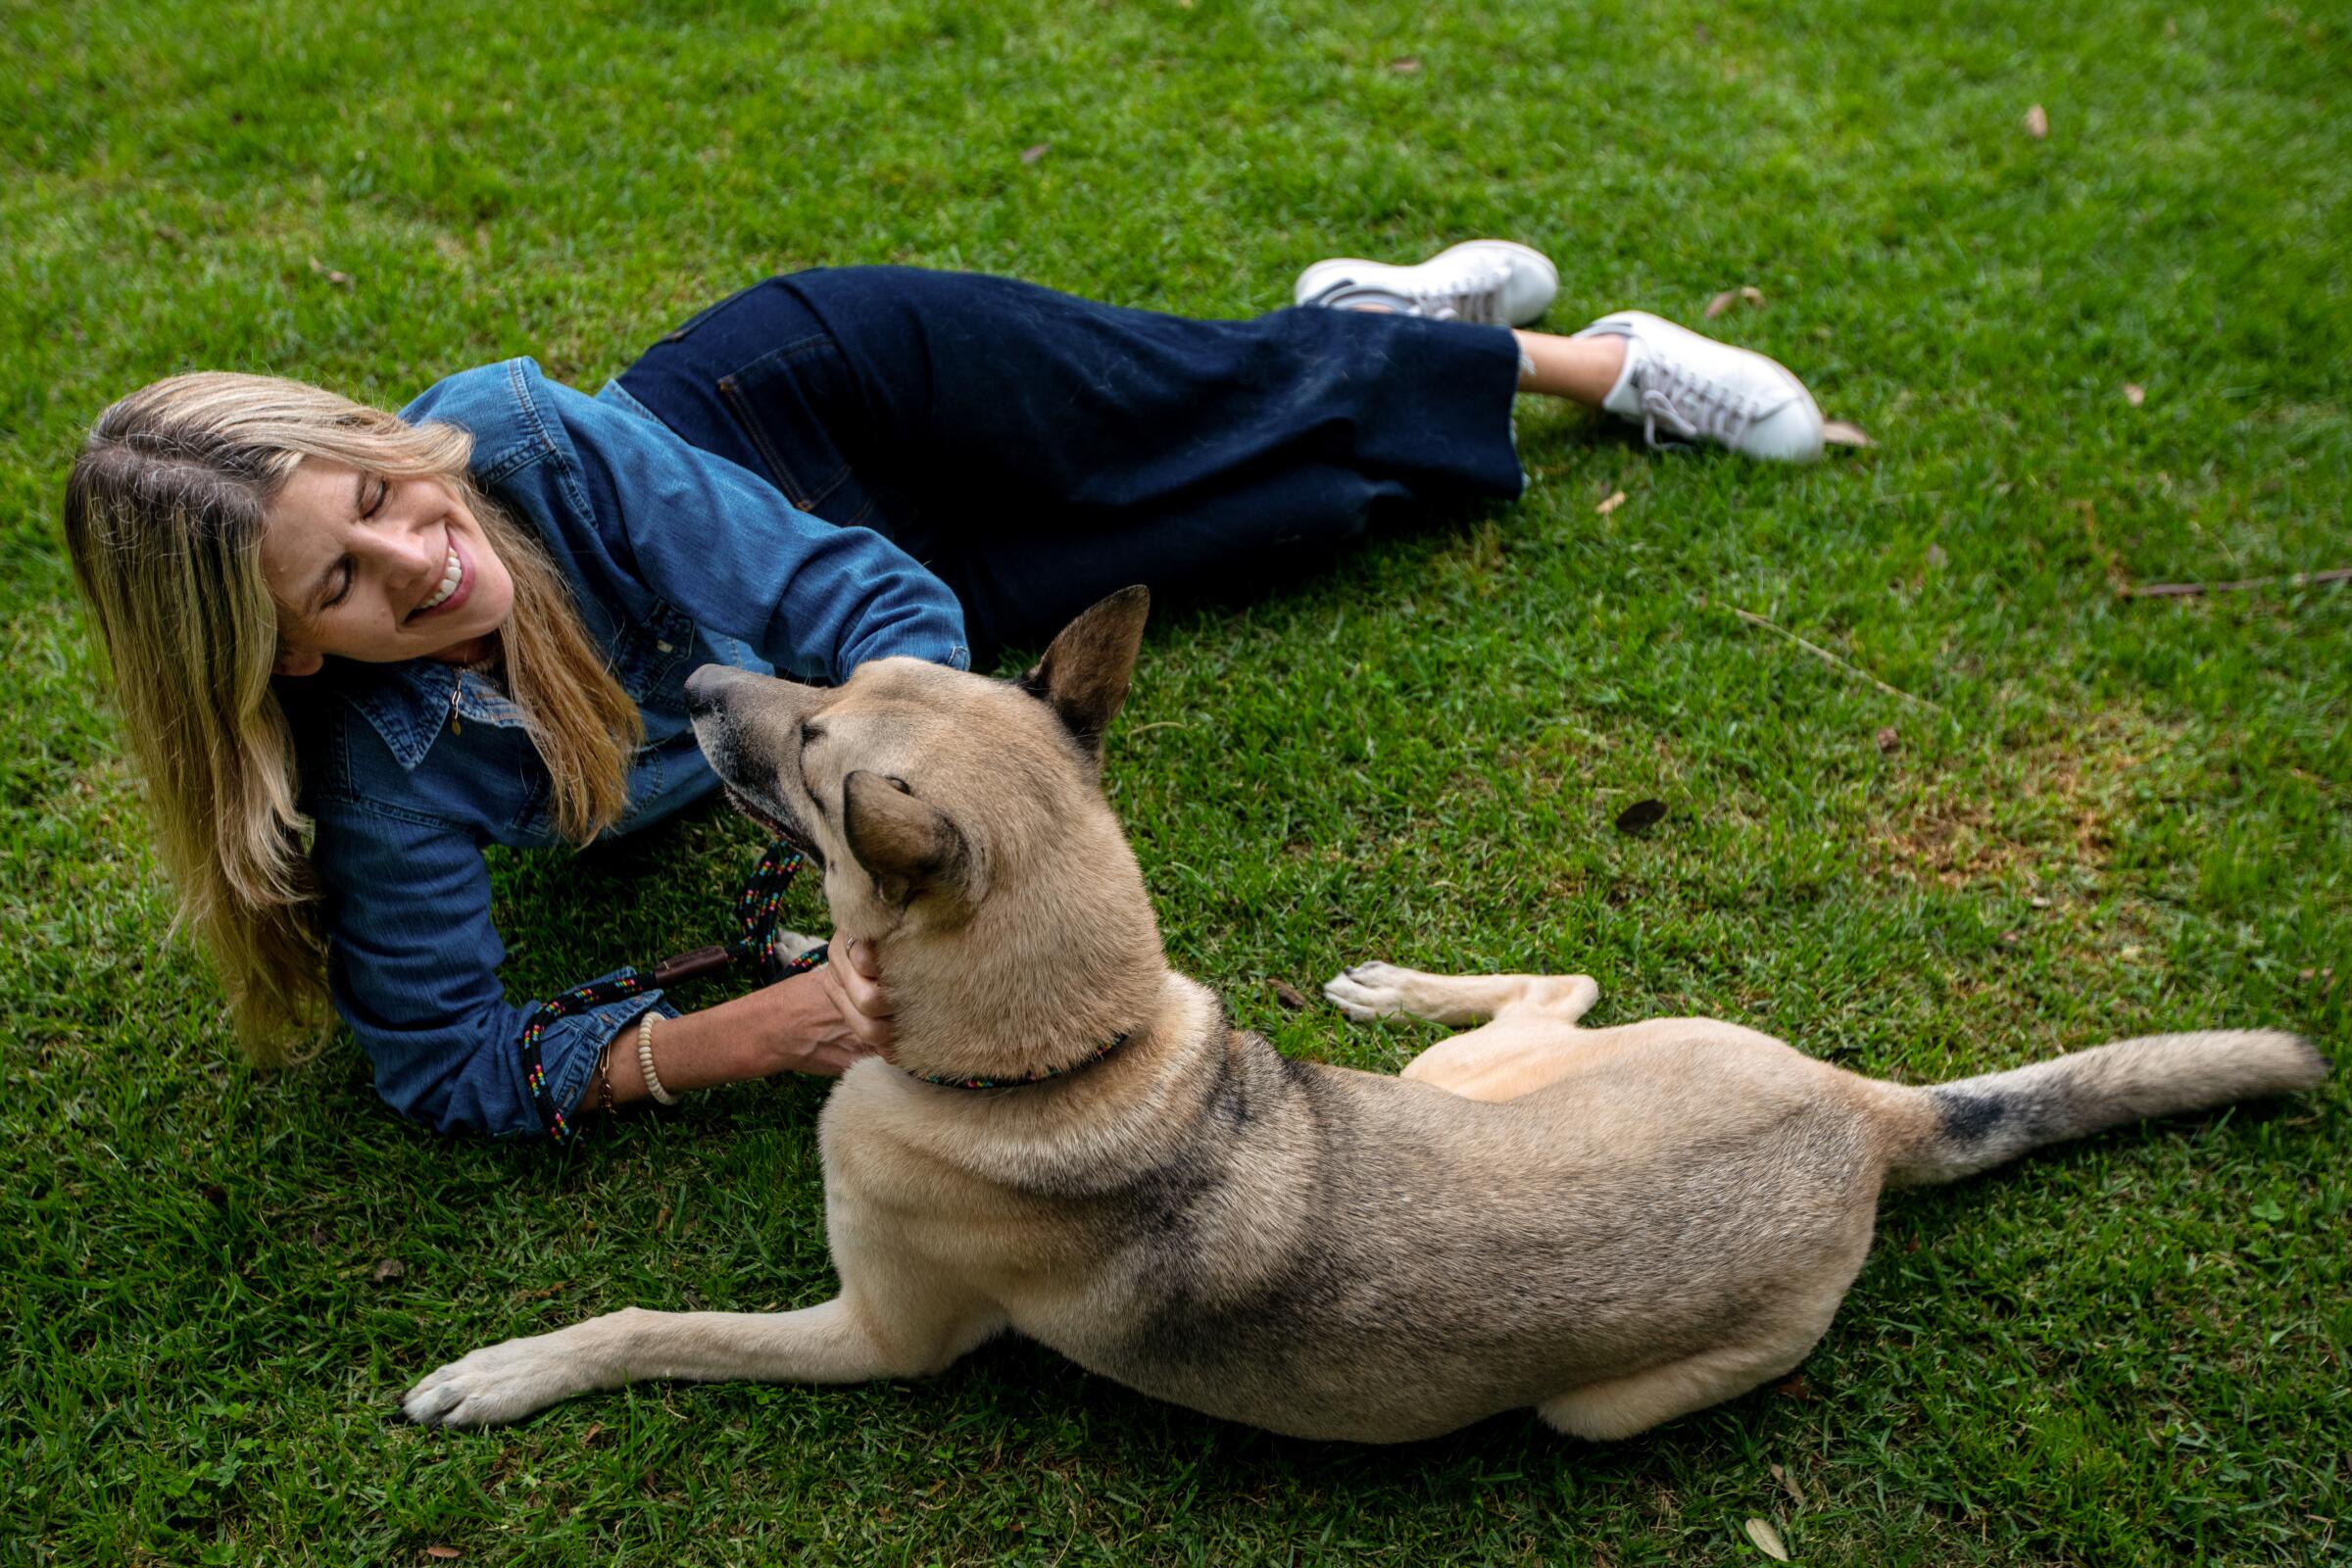 A woman lies on the grass with her dog. They are looking at each other.